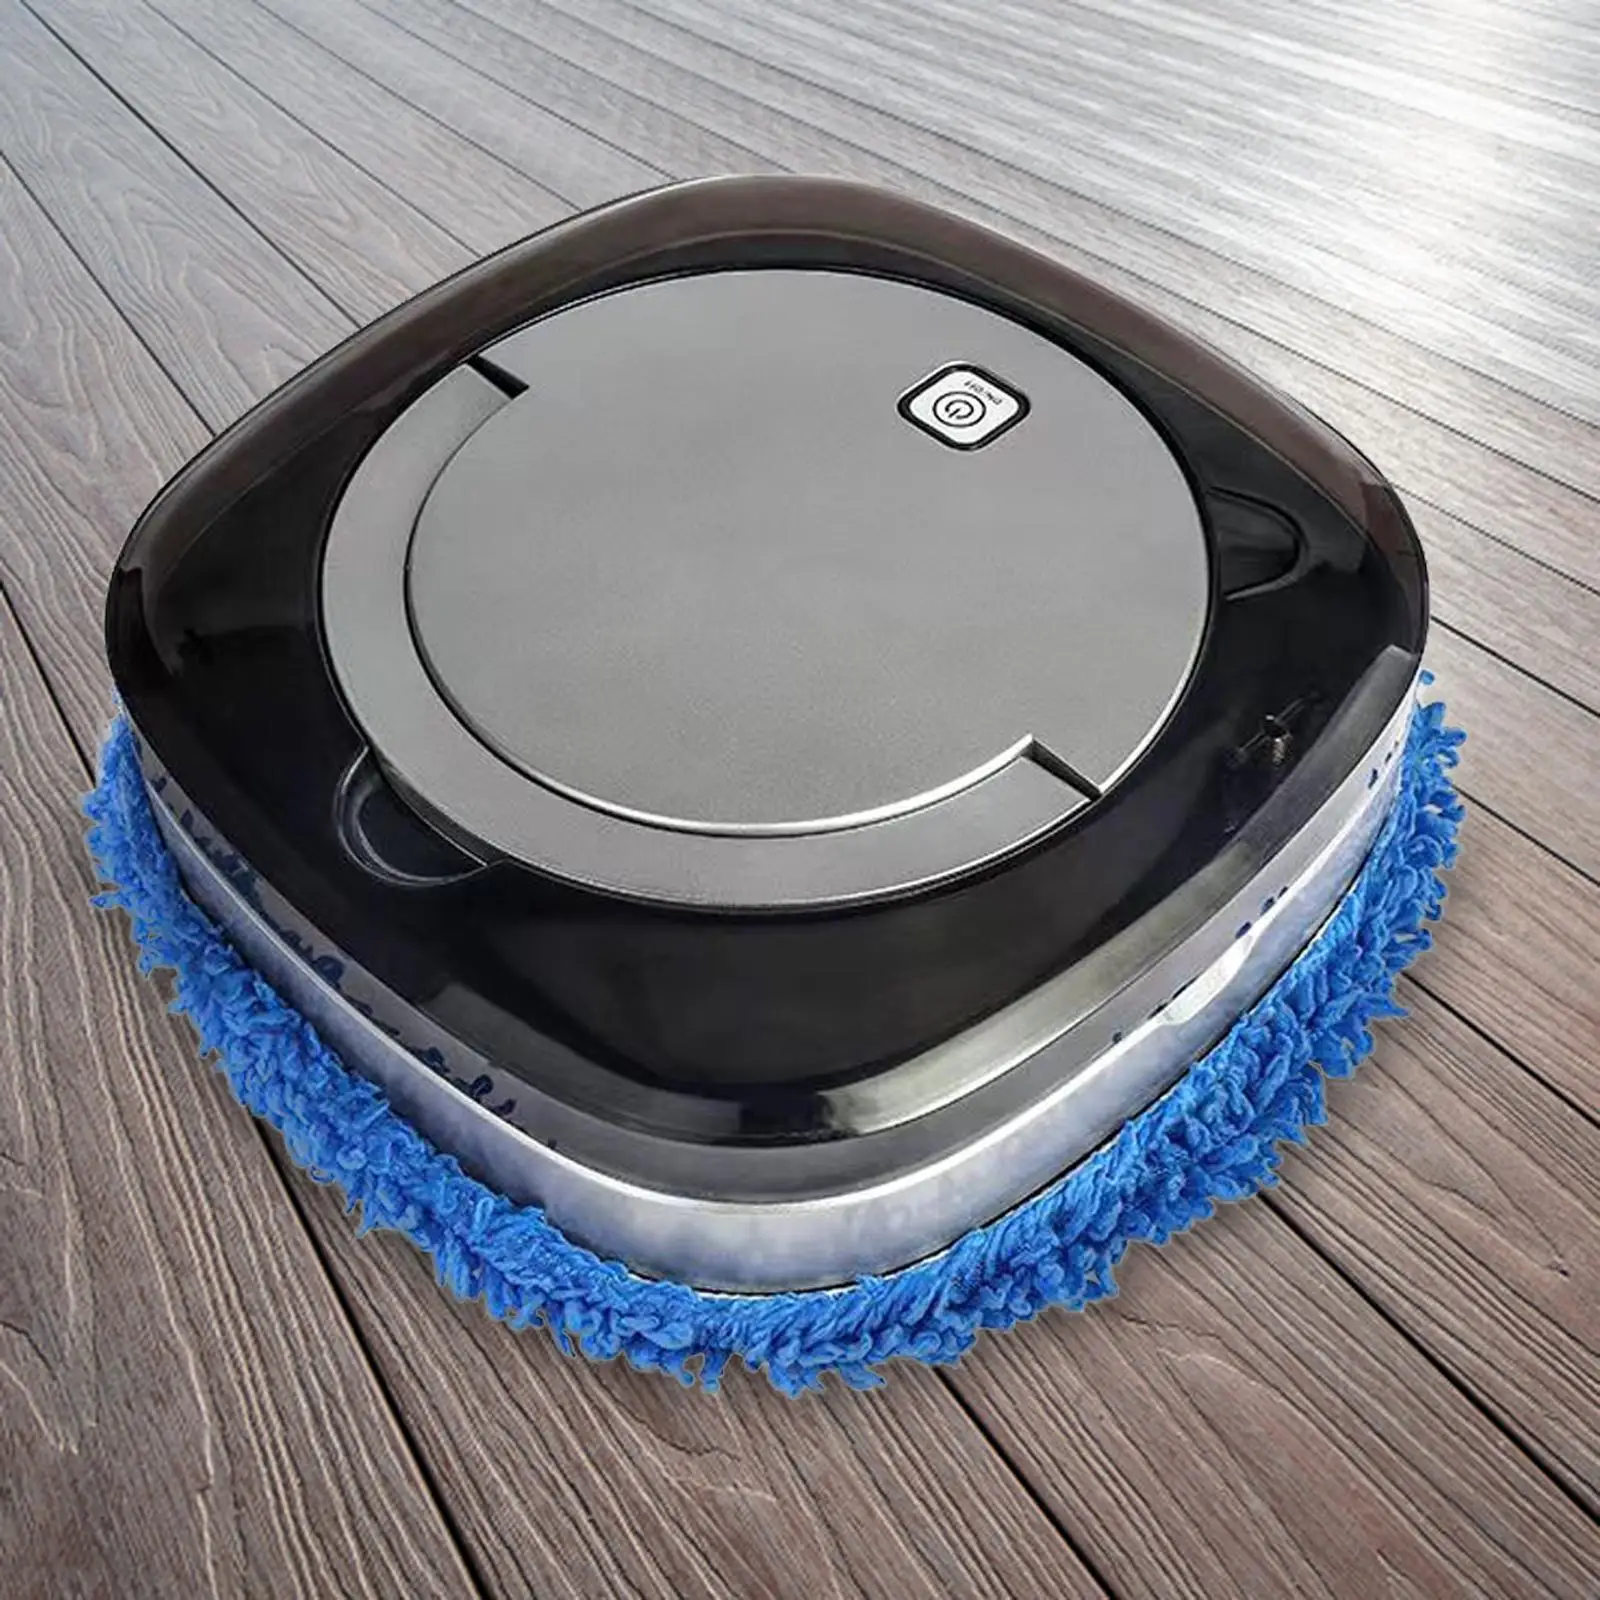 Robot Vacuum Cleaner Dry and Wet mops low Noise Household Cleaning Machine Robot Sweeper for Hard Floor/Wood floor Sofa